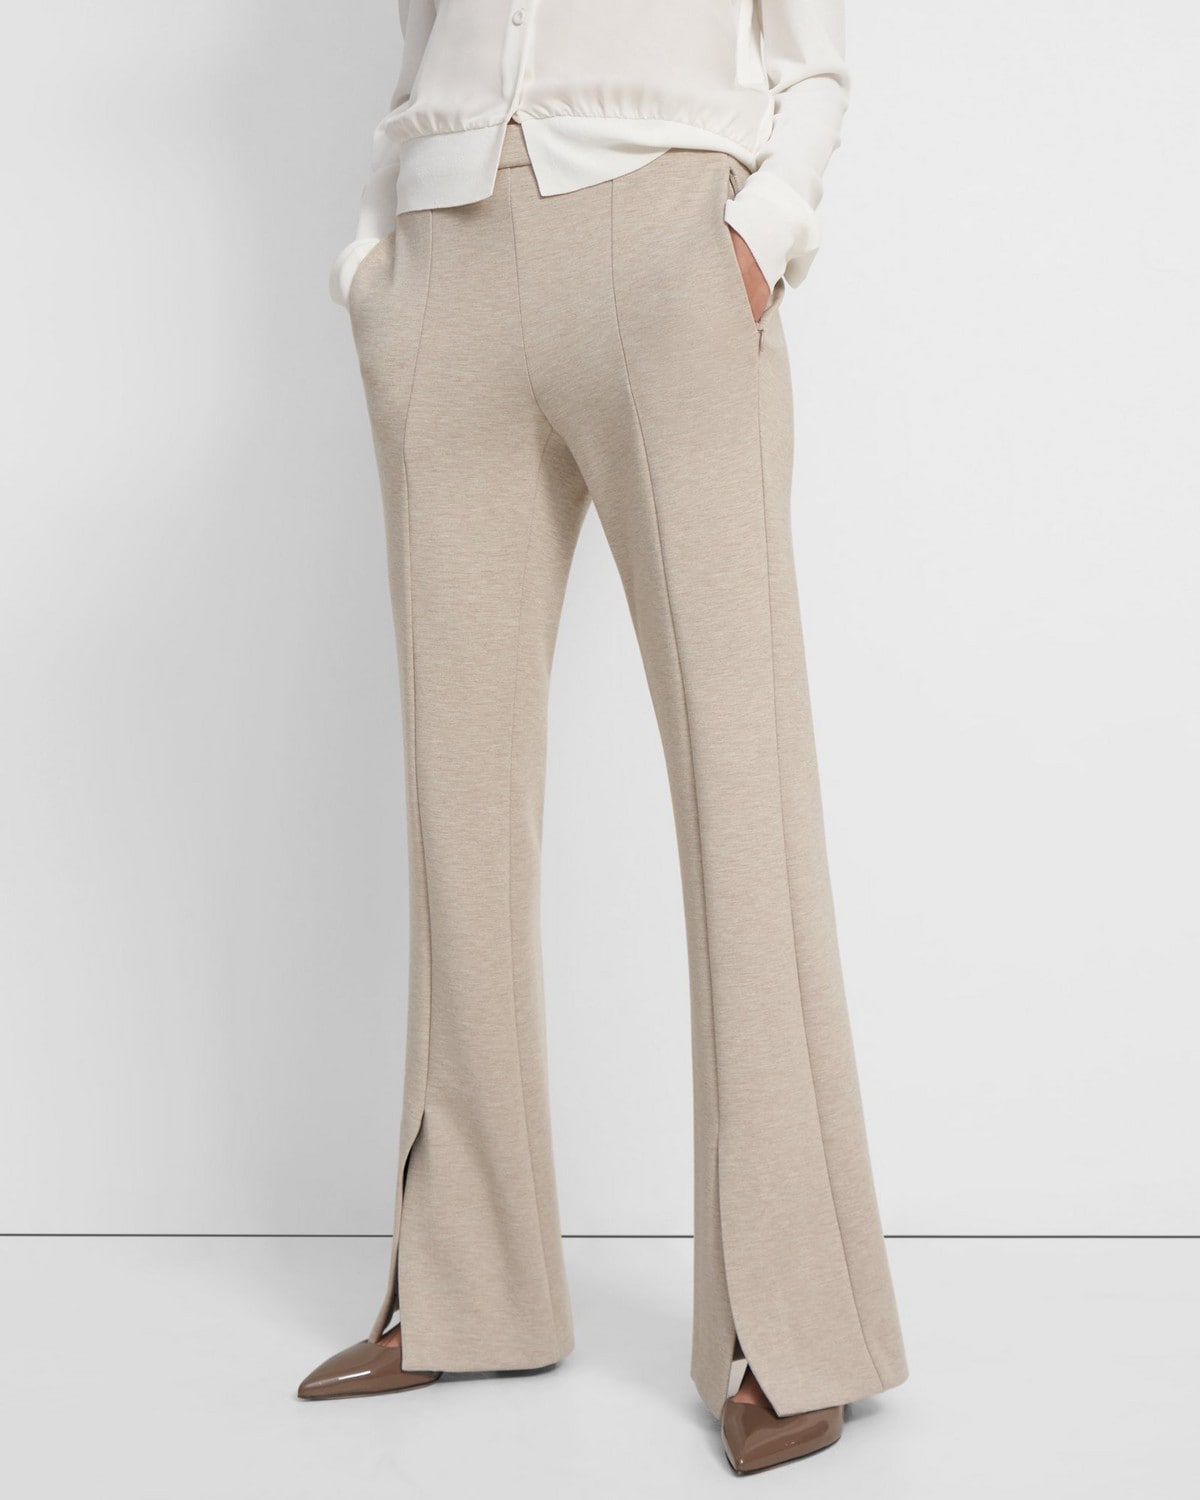 Slit Demitria Pant in Double-Knit Jersey